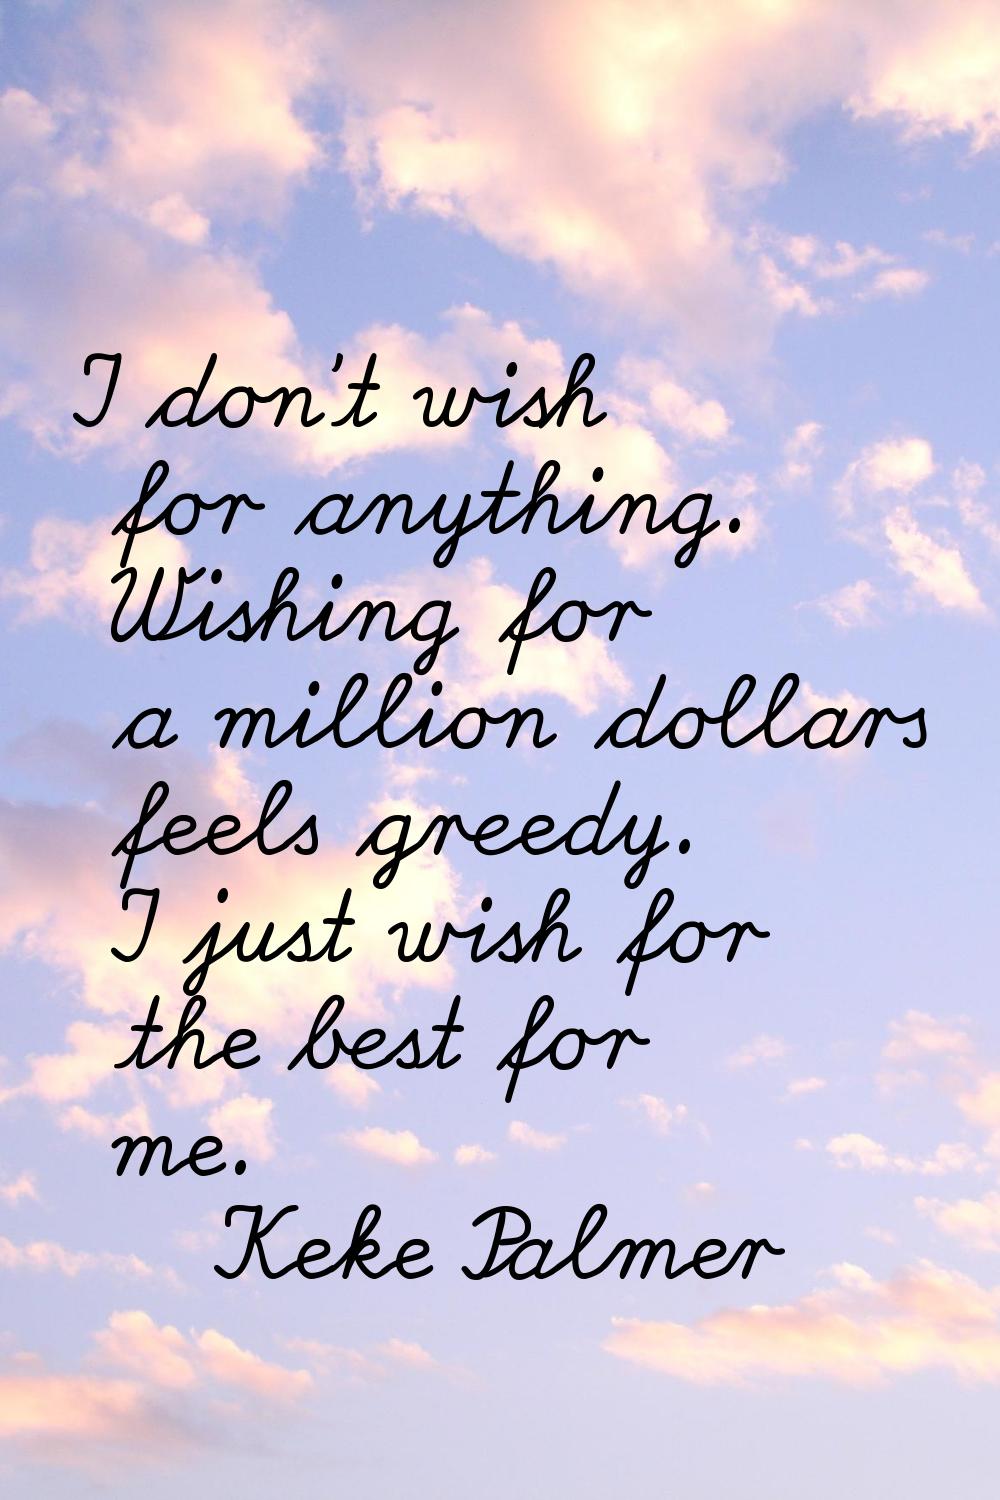 I don't wish for anything. Wishing for a million dollars feels greedy. I just wish for the best for